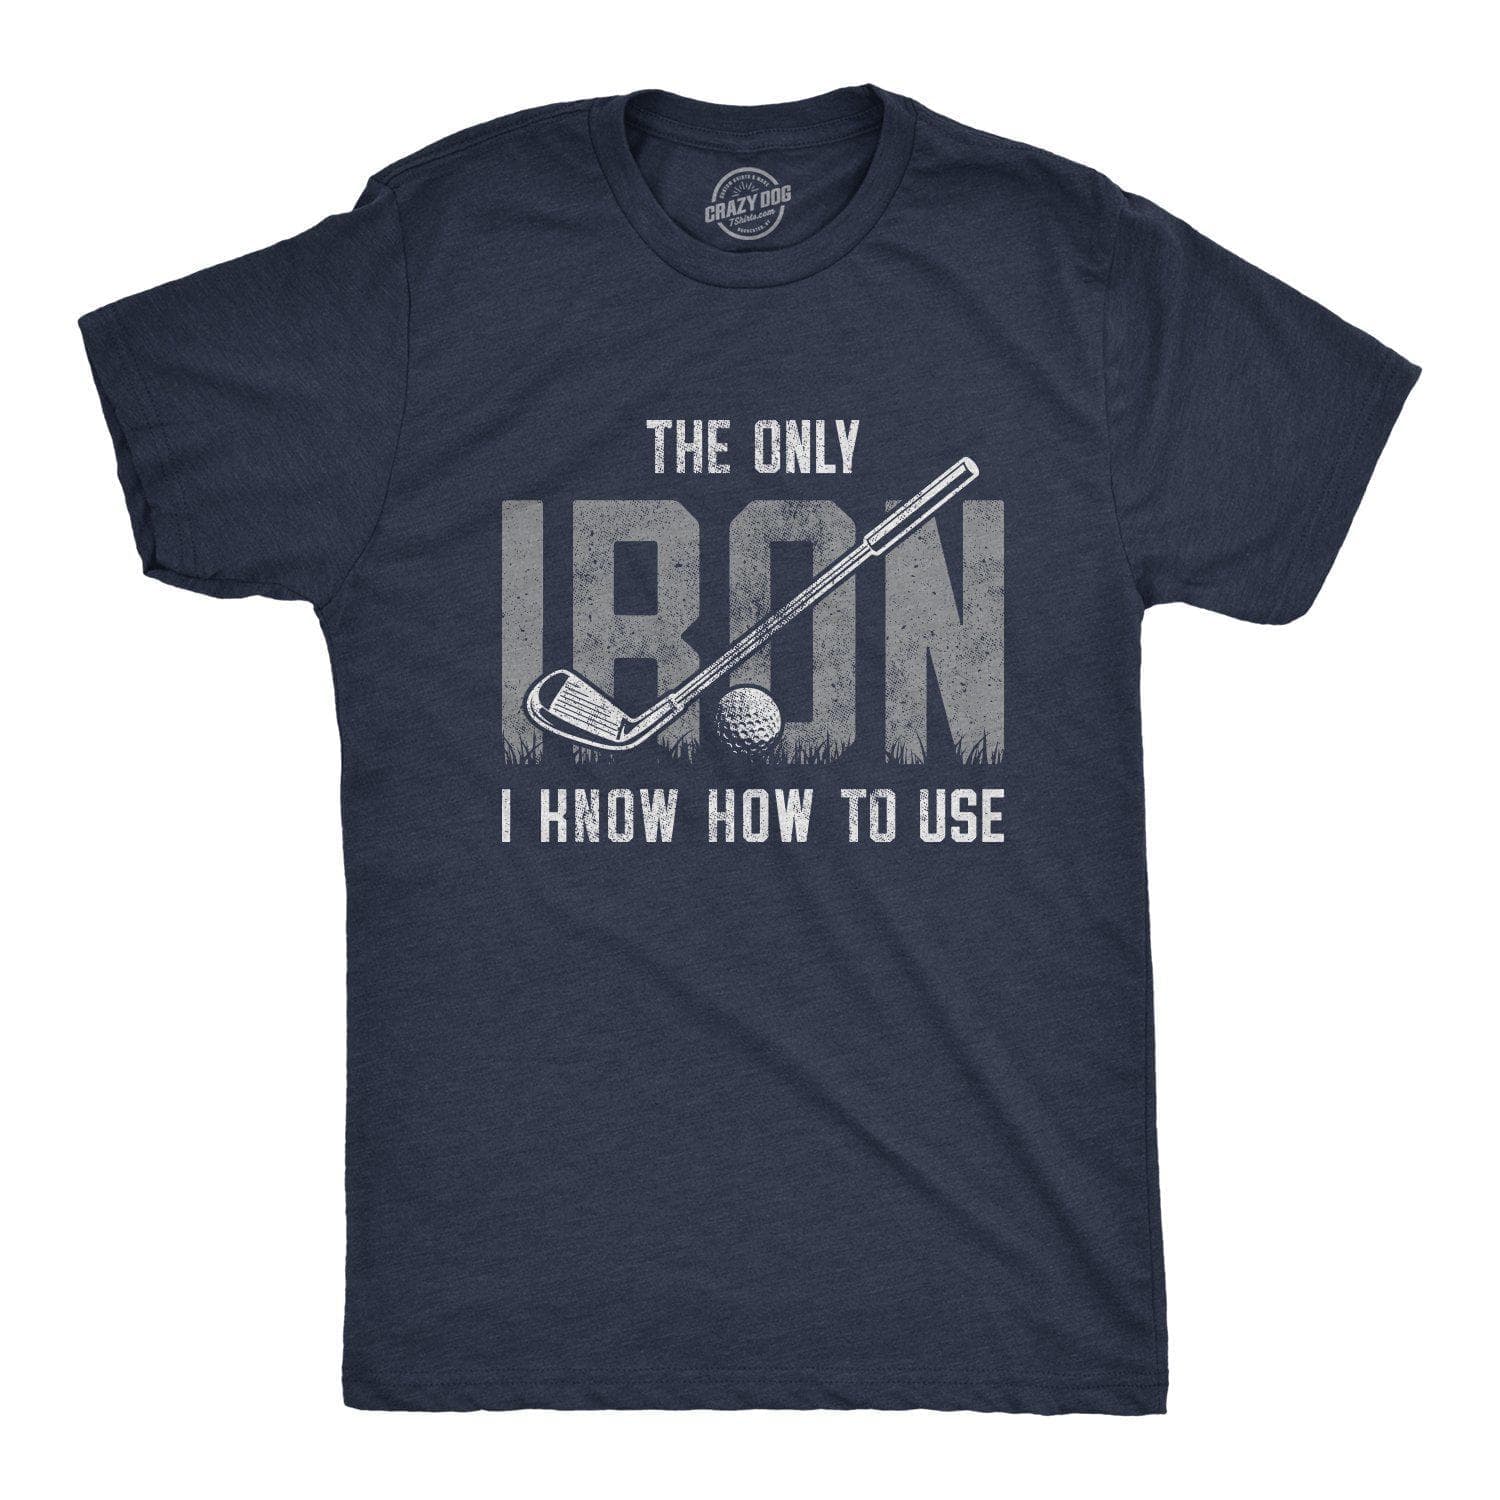 The Only Iron I Know How To Use Men's Tshirt - Crazy Dog T-Shirts